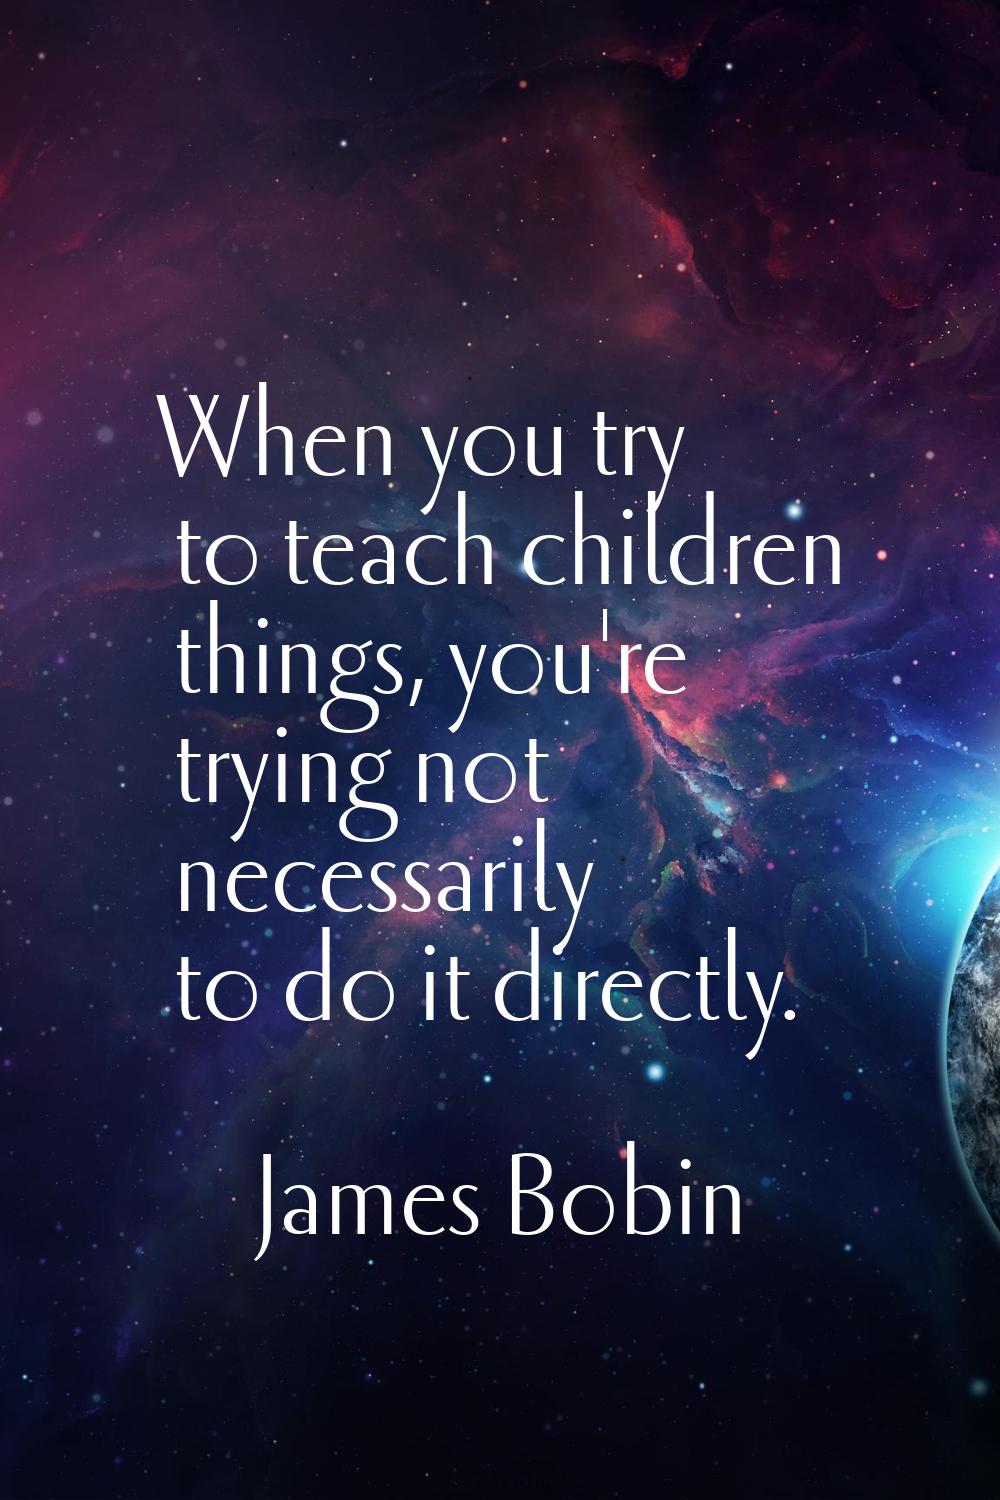 When you try to teach children things, you're trying not necessarily to do it directly.